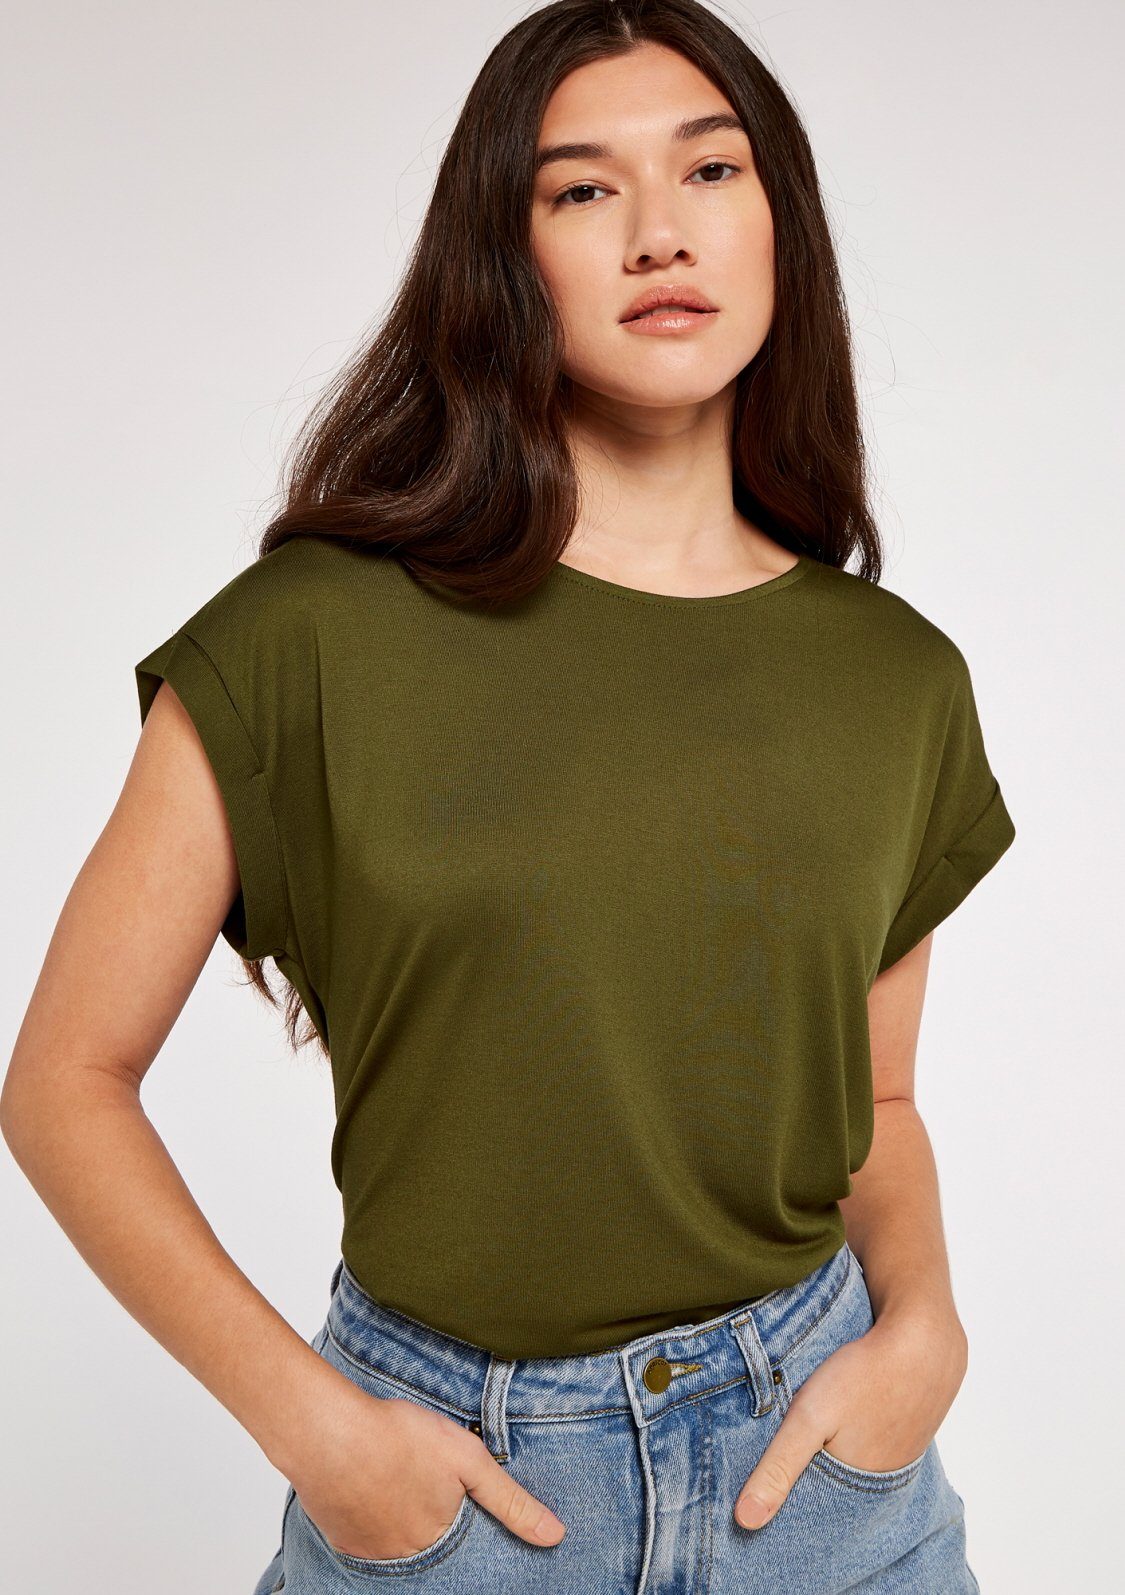 Apricot T-Shirt Curved (1-tlg) Hem Ware in Tee weicher